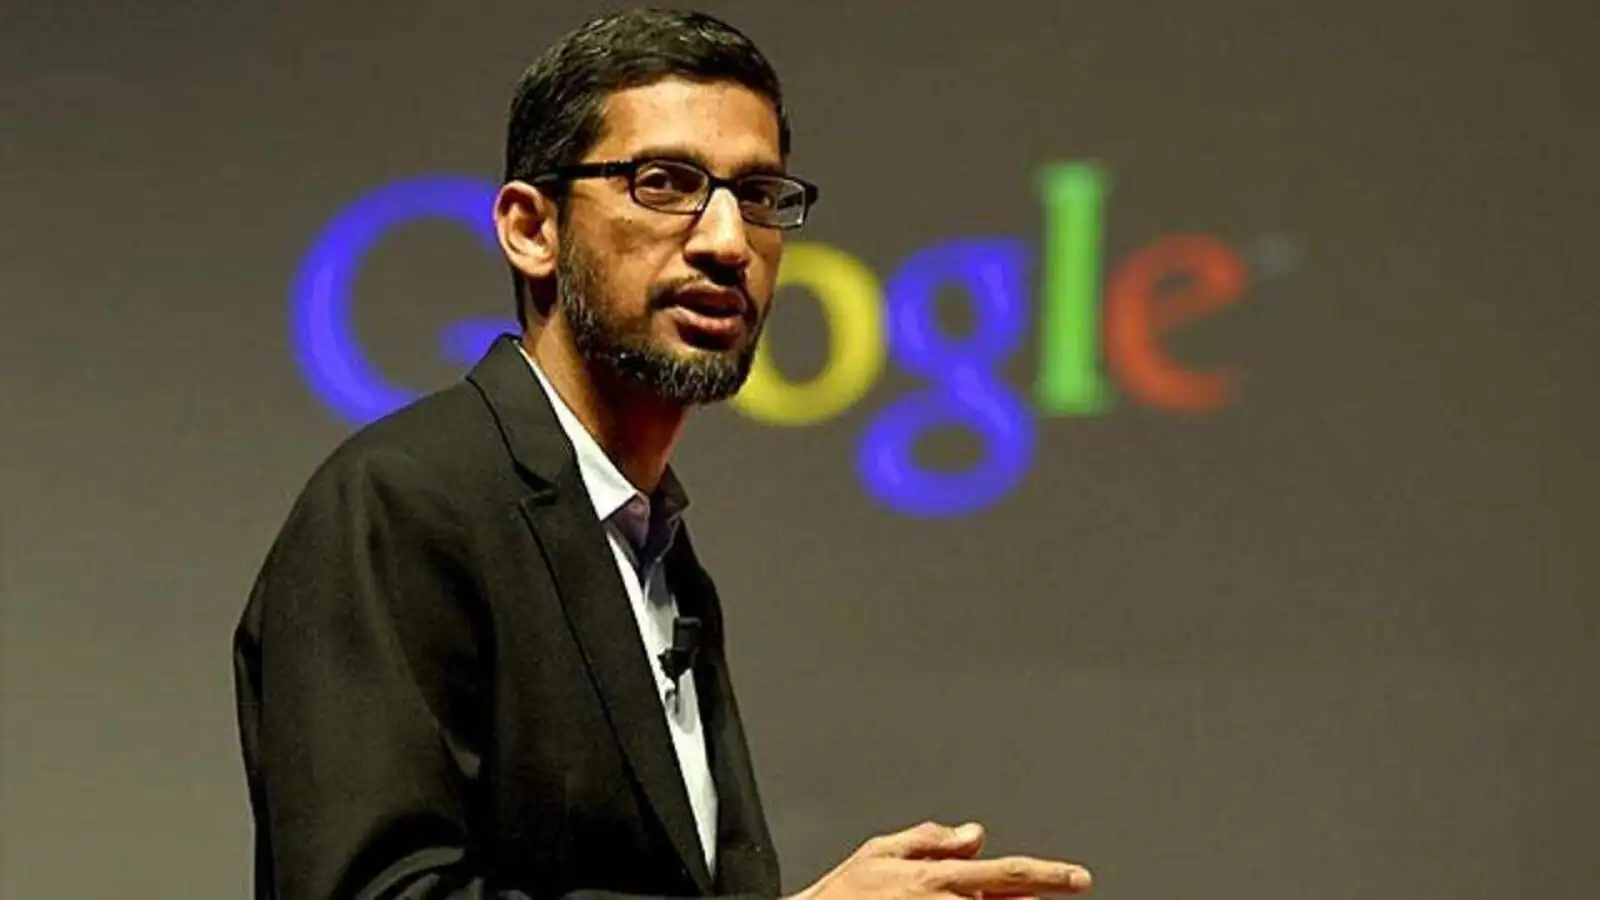 Know Why the Tech World Is Buzzing About Google’s CEO Sundar Pichai Amid AI Controversy